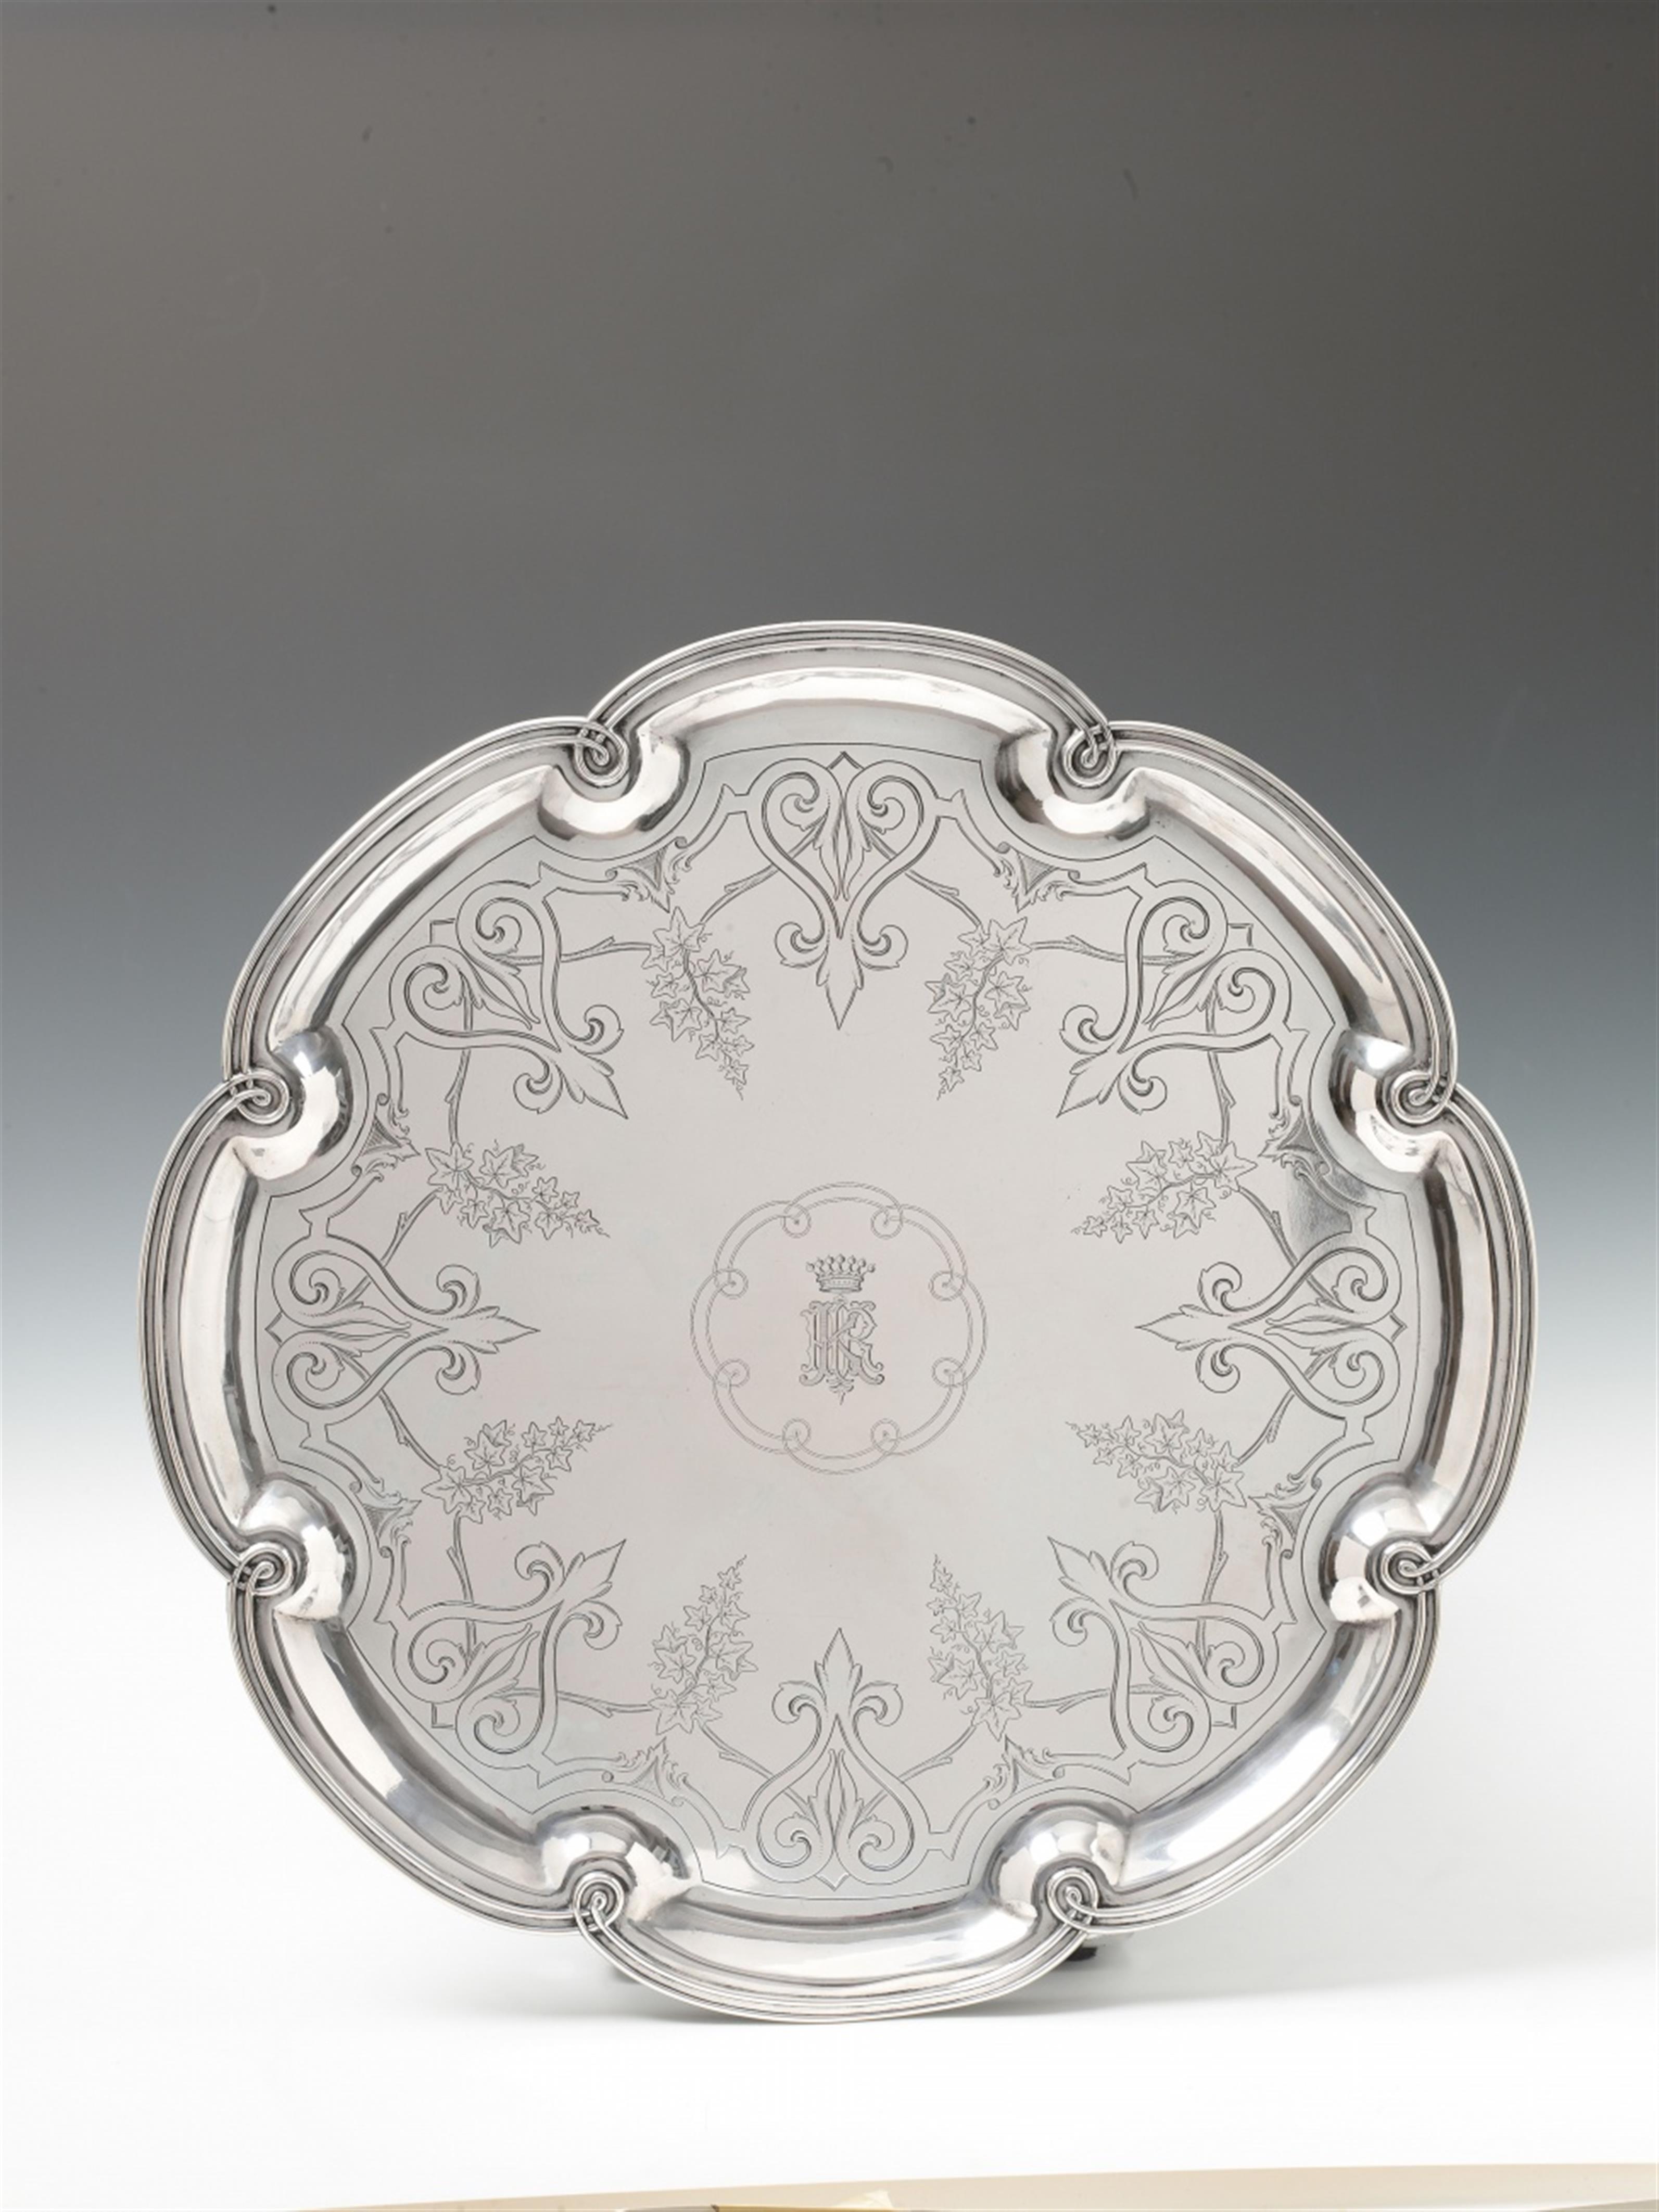 A large Berlin silver tray. Monogrammed "HRK" to the centre. Unidentified maker's mark "S", ca. 1860 - 80. - image-1